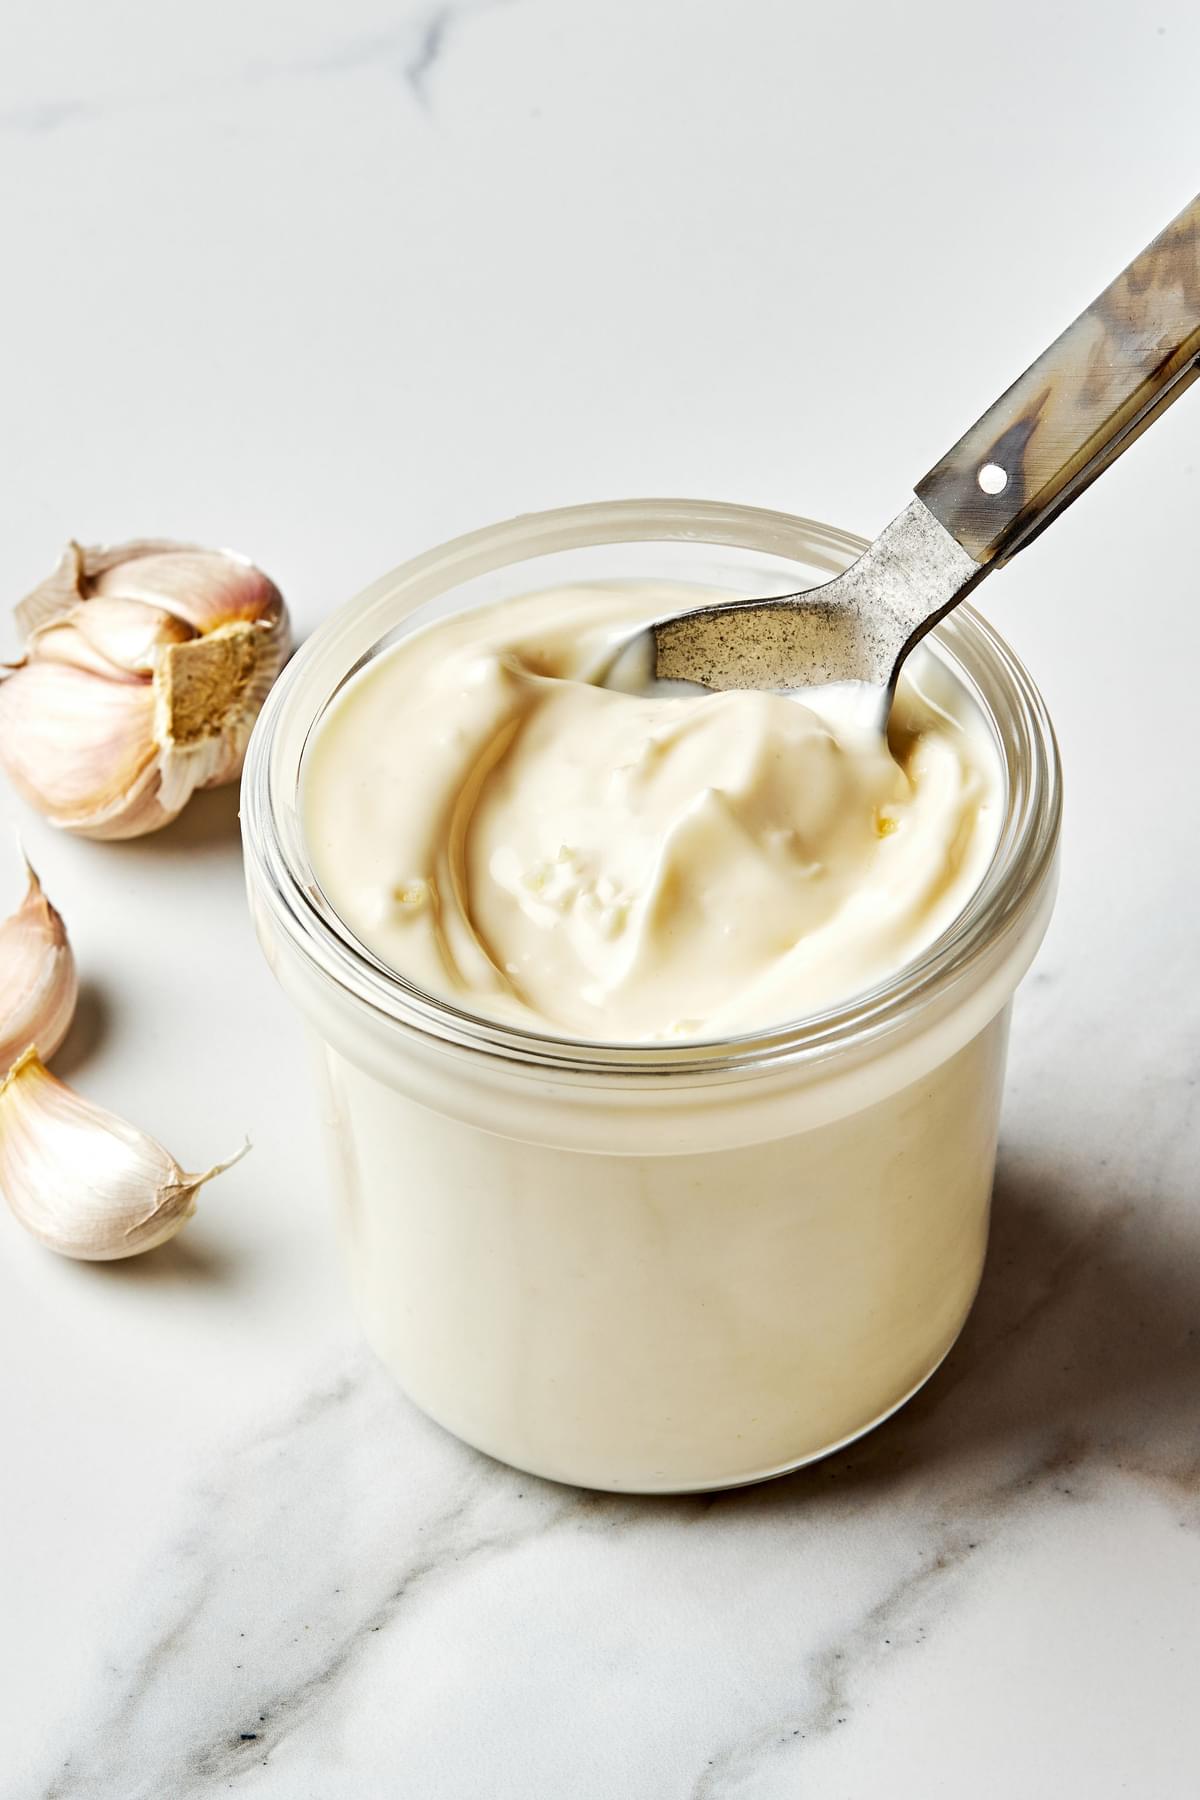 homemade garlic aioli in a jar with a spoon surrounded by garlic cloves scattered on the counter